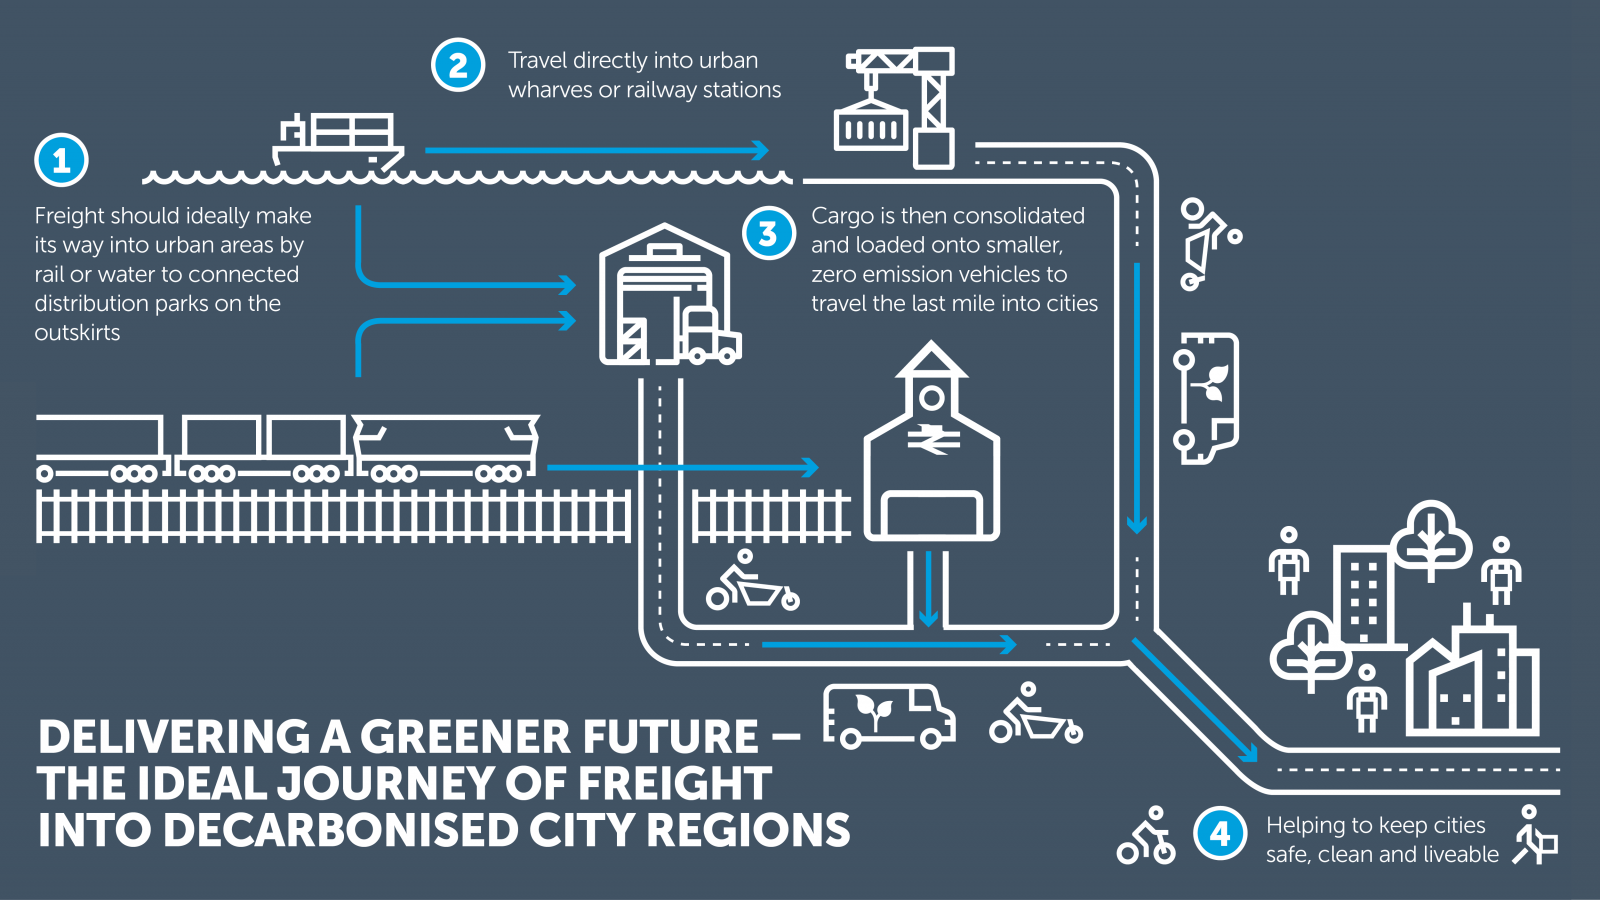 Delivering a greener future infographic